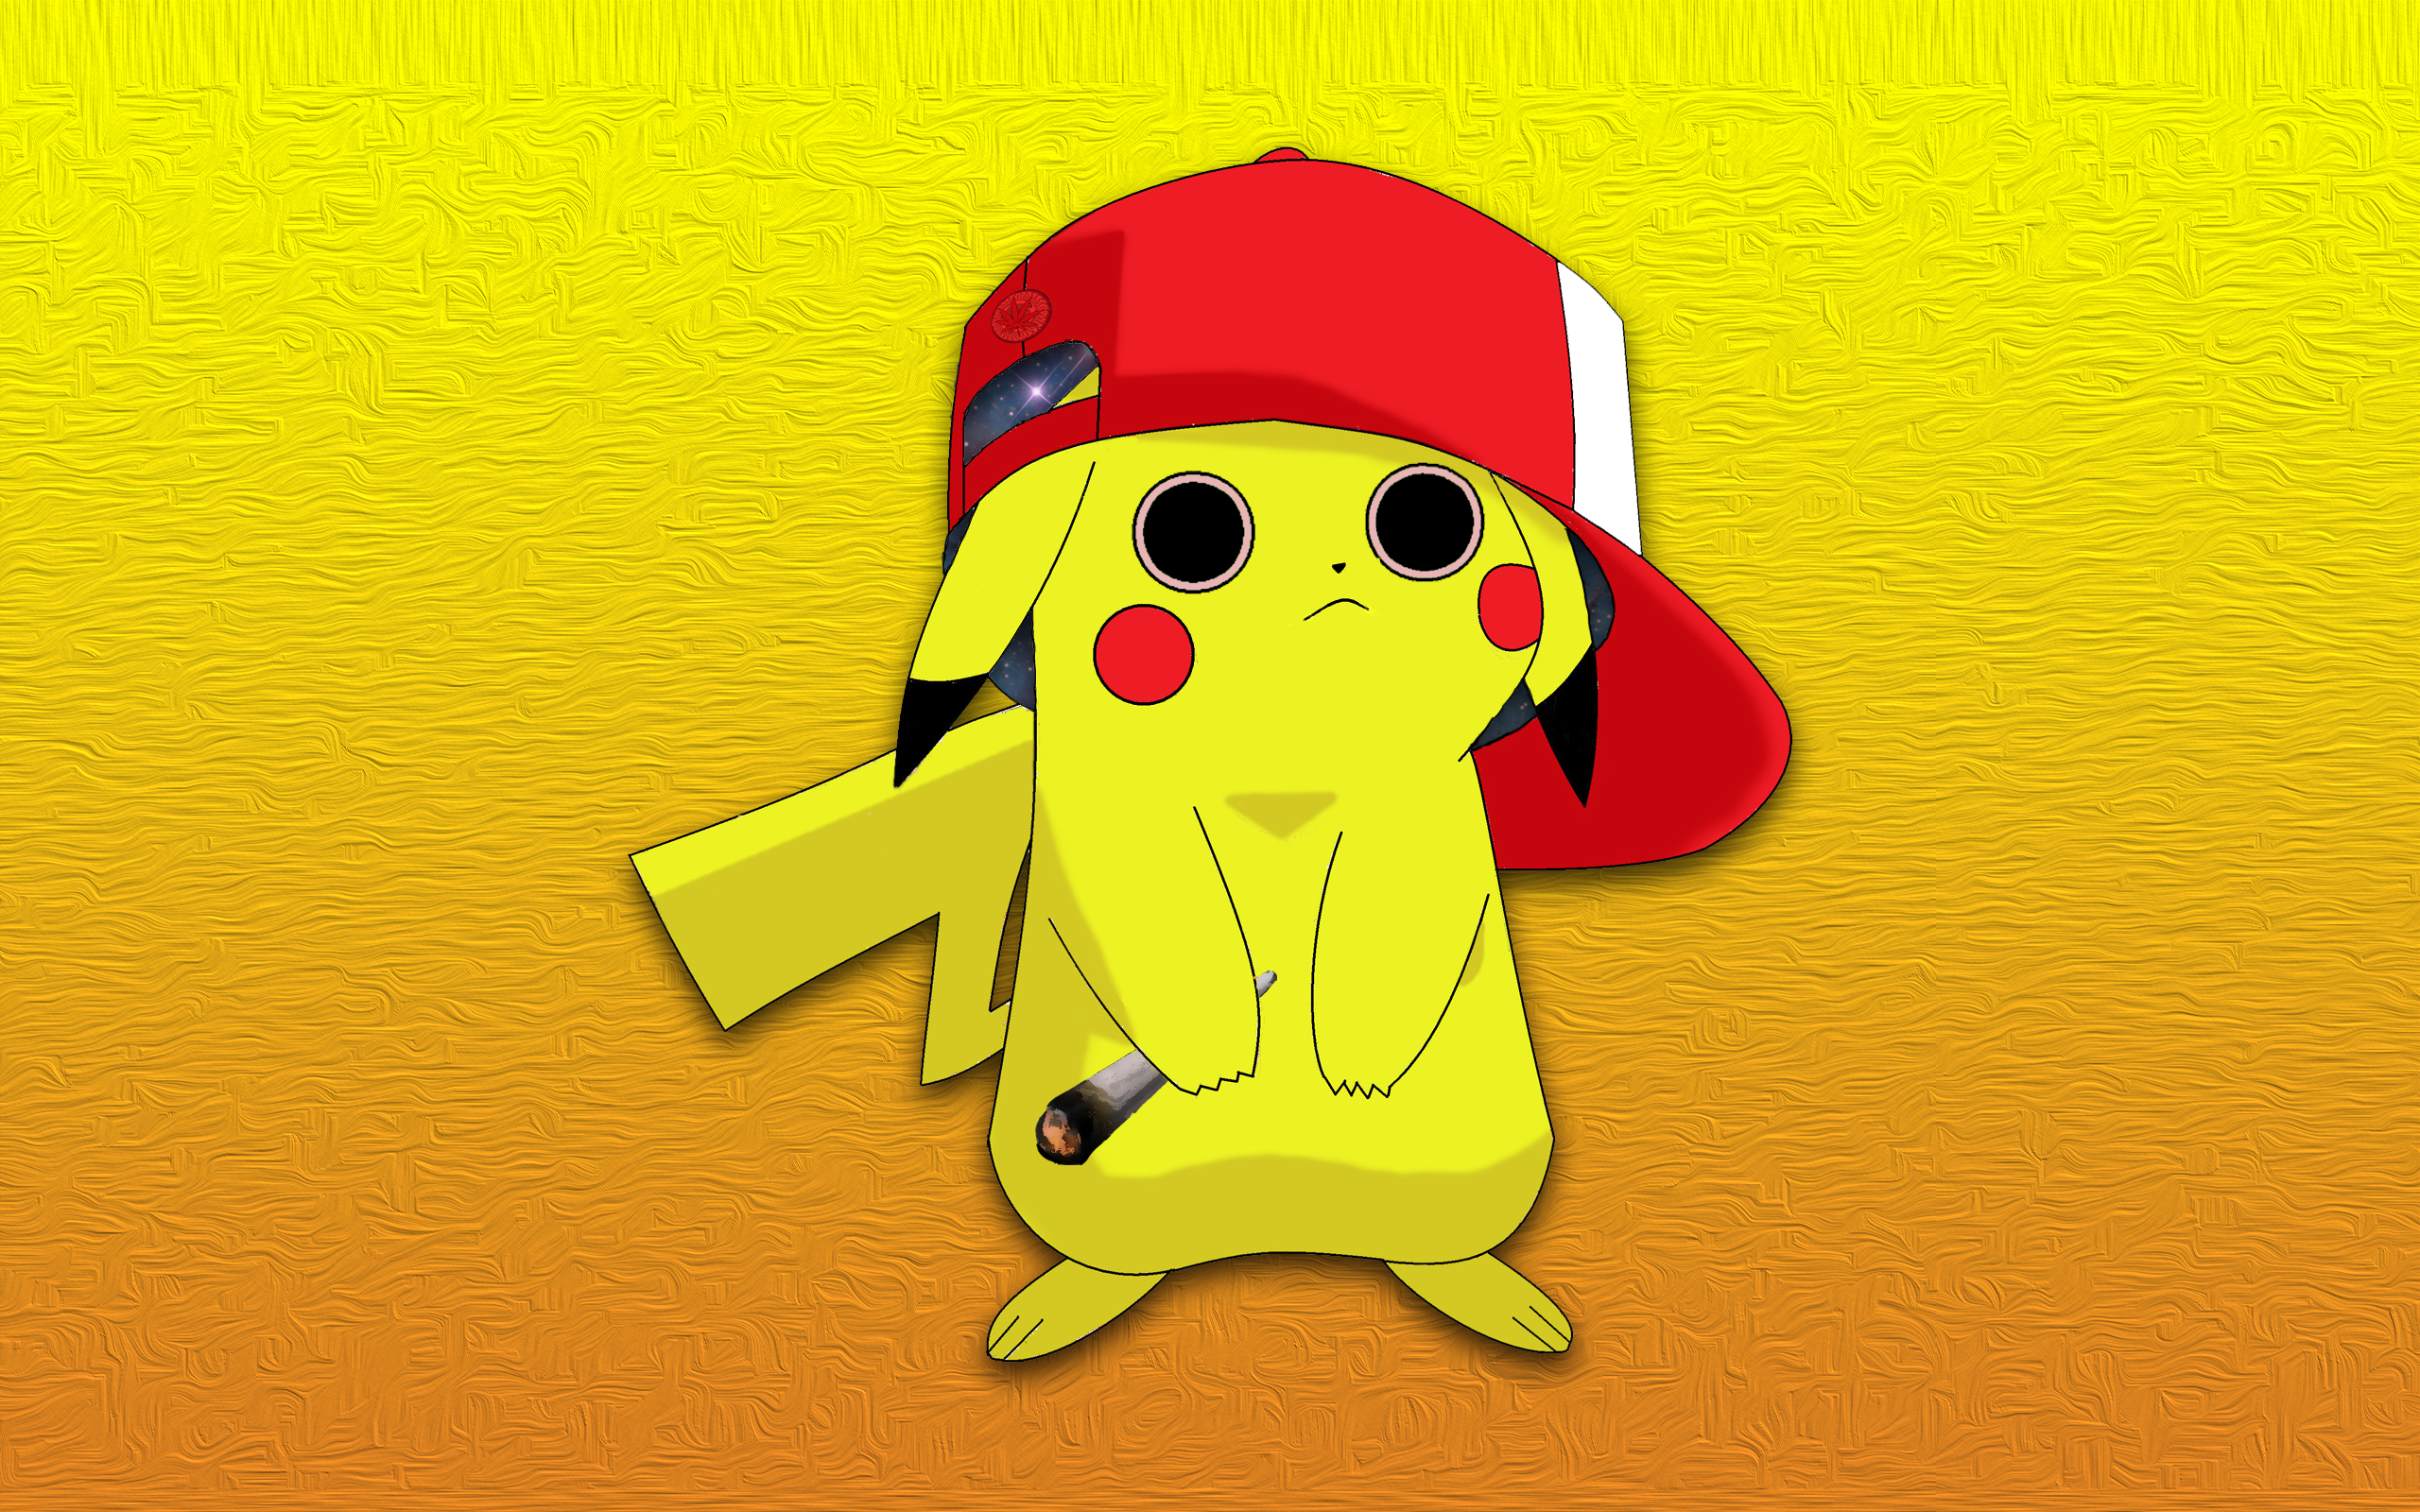 General 2560x1600 psychedelic trippy Pokémon Pikachu cannabis video game characters simple background digital art